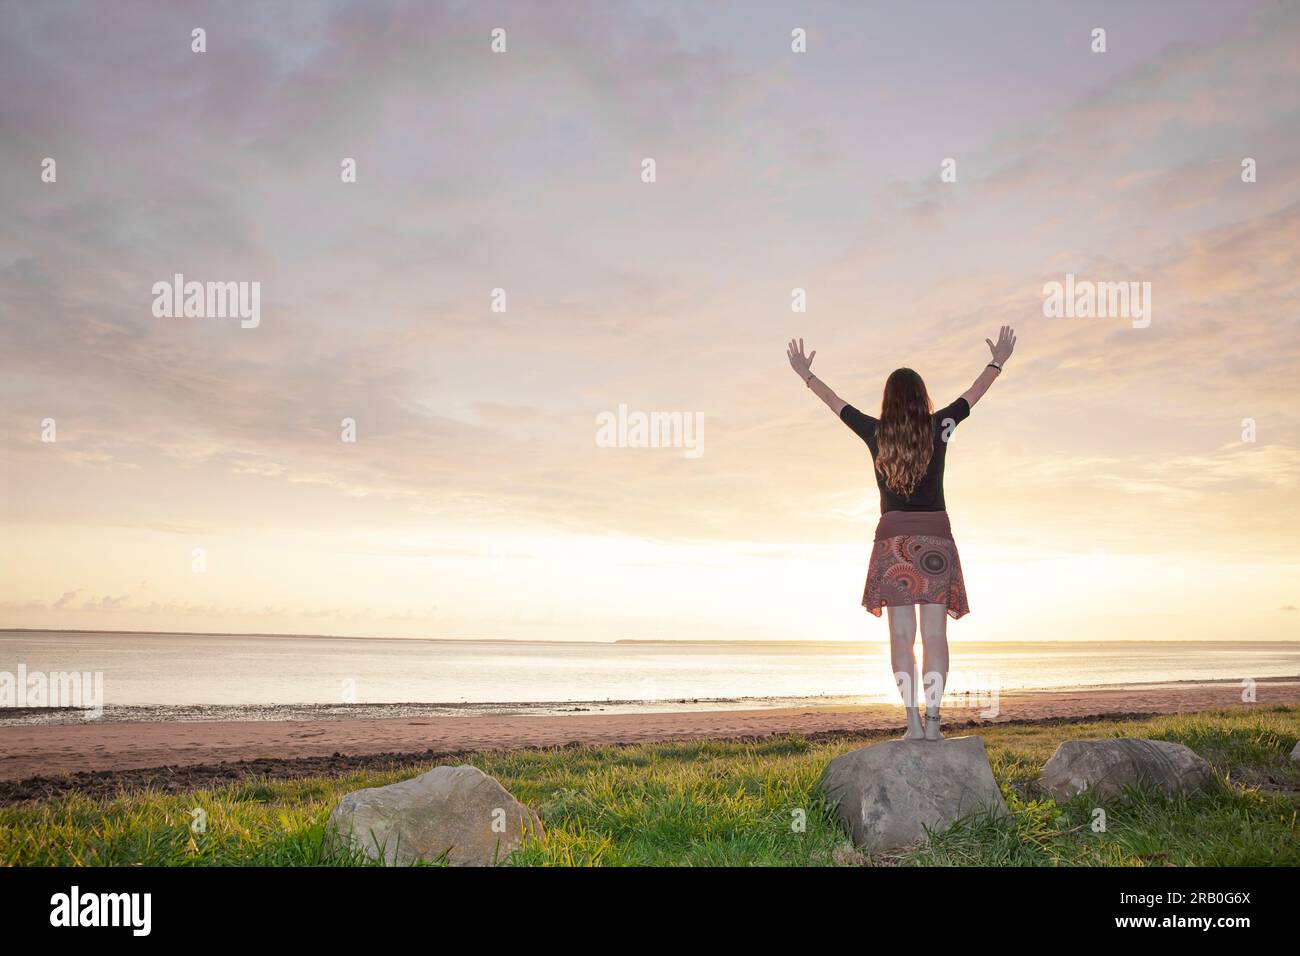 A woman standing on a beach with her arms spread out silhouette Stock Photo